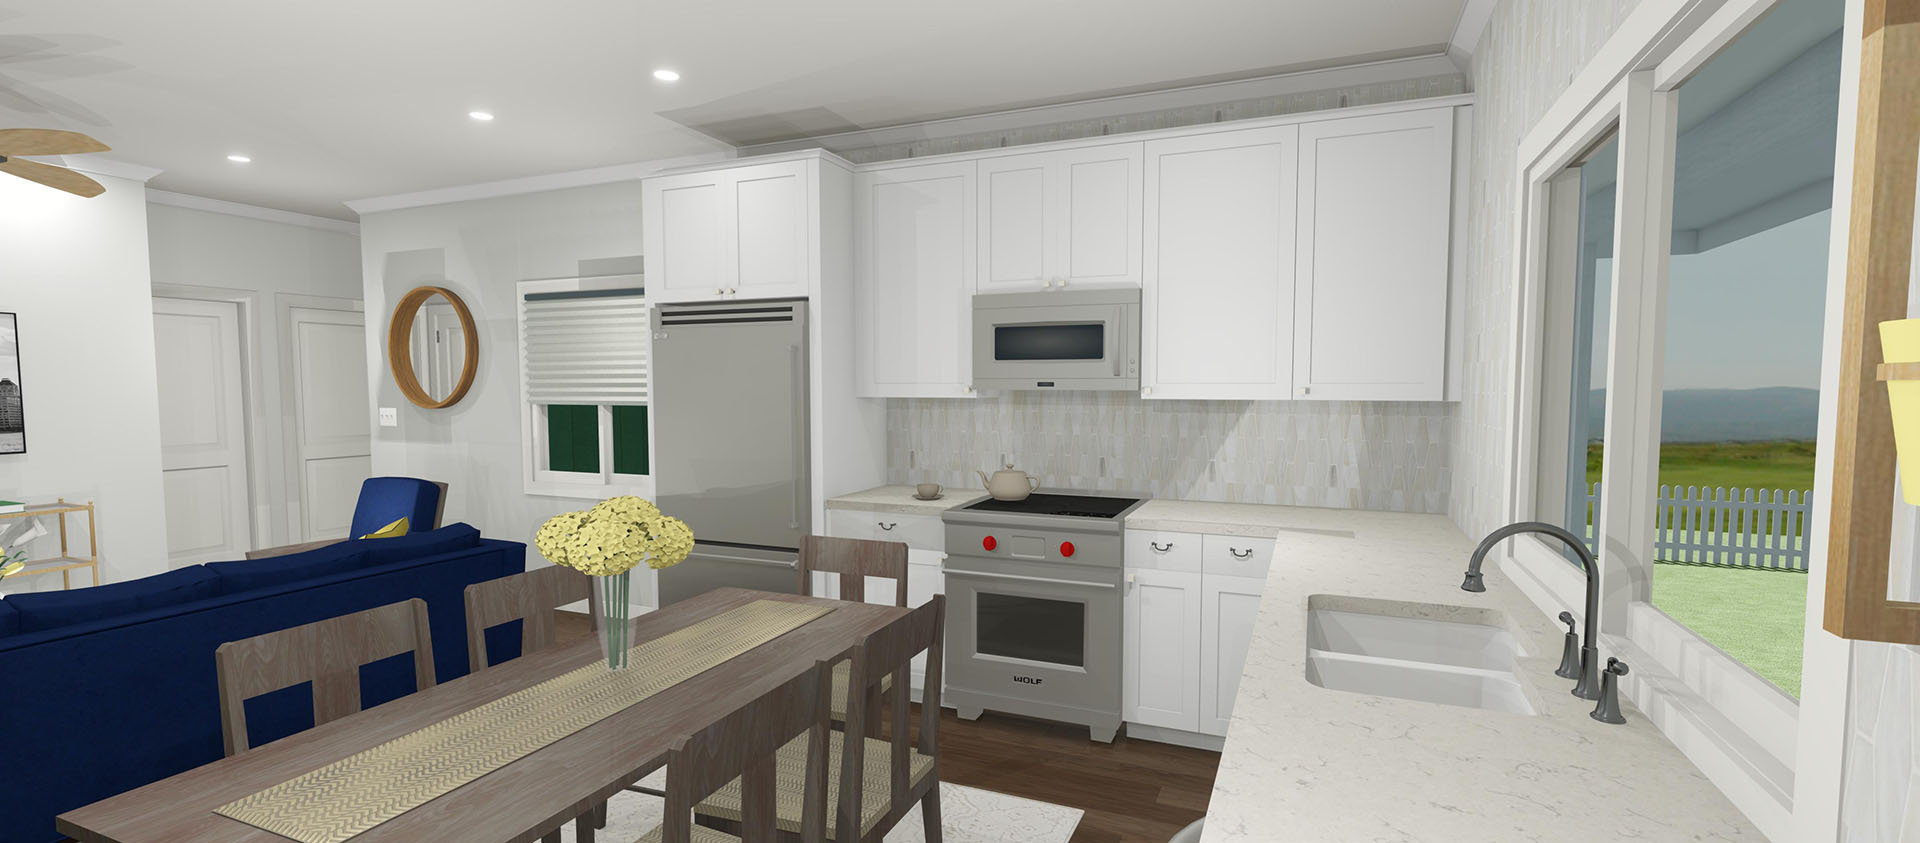 Kitchen with white cabinets and a wooden dining table